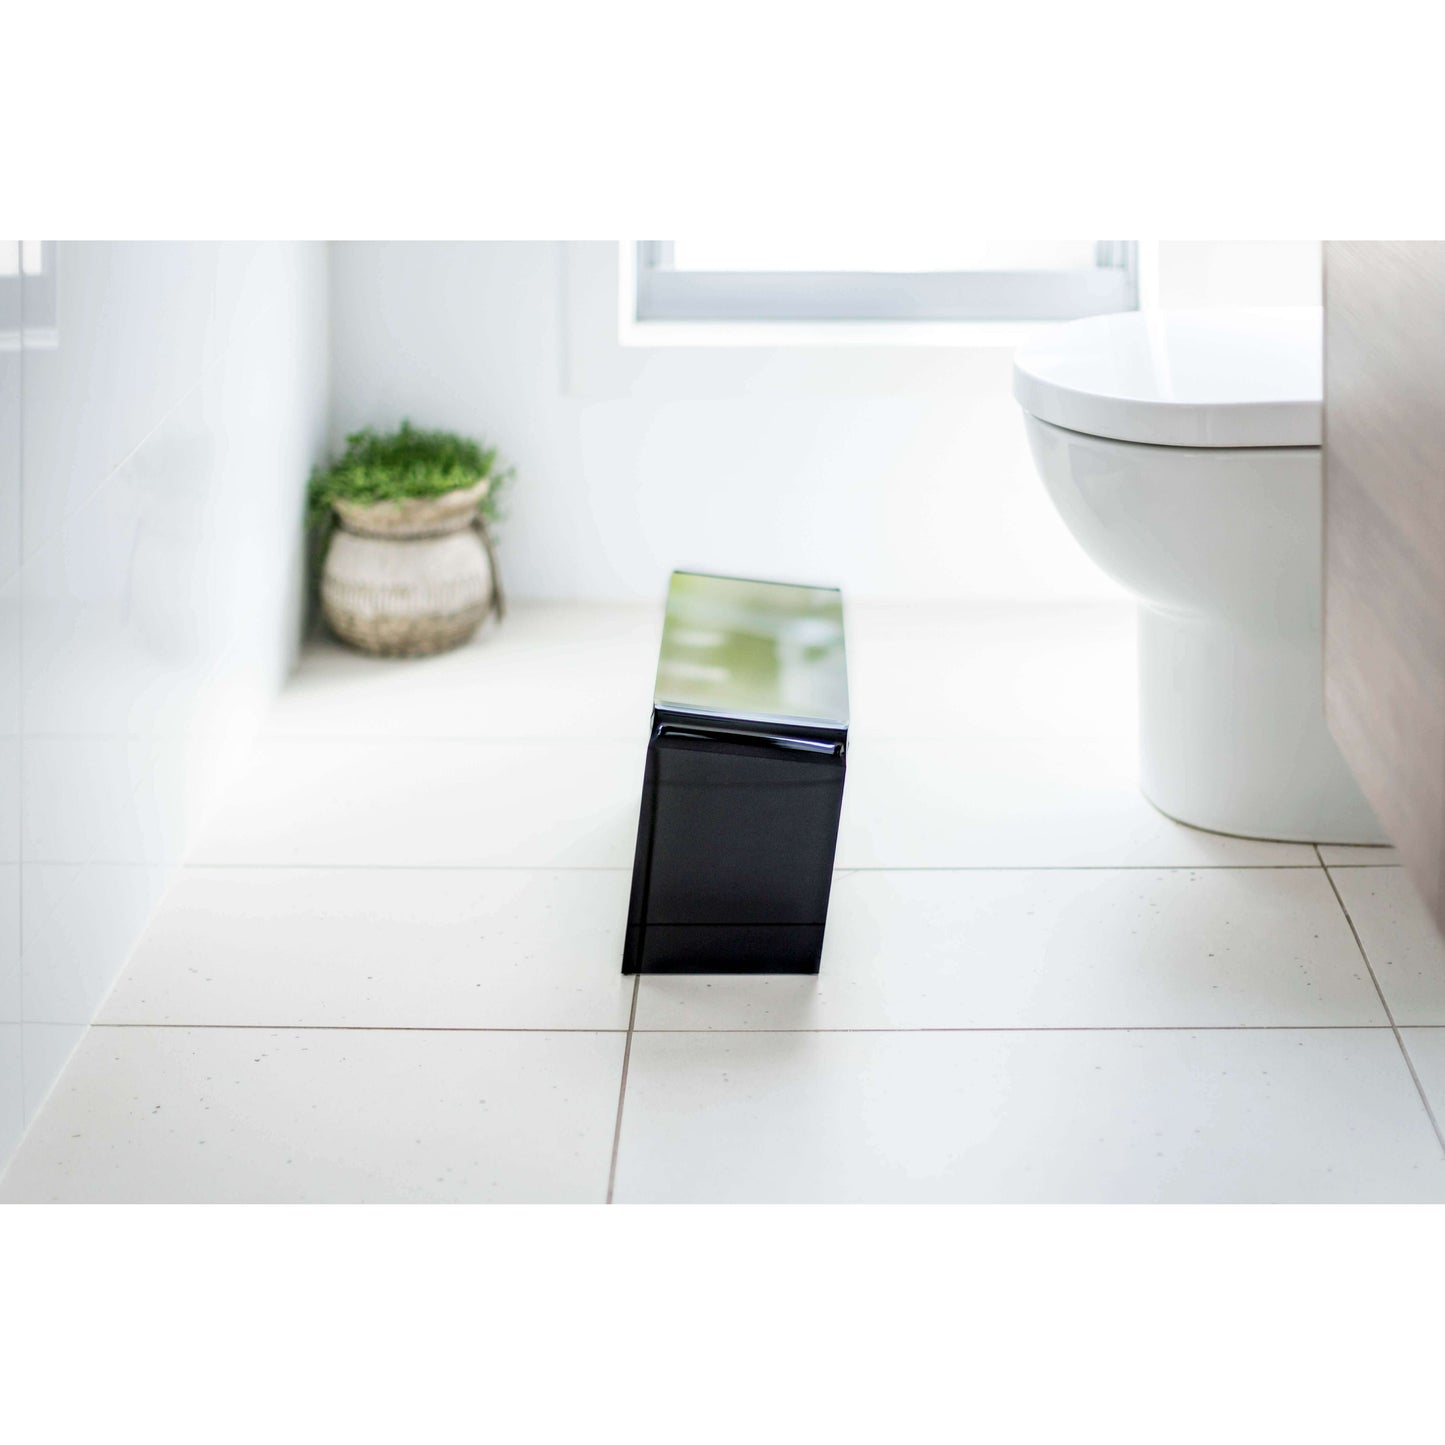 The PROPPR Acer - Black Toilet Foot Stool - side view in a bathroom